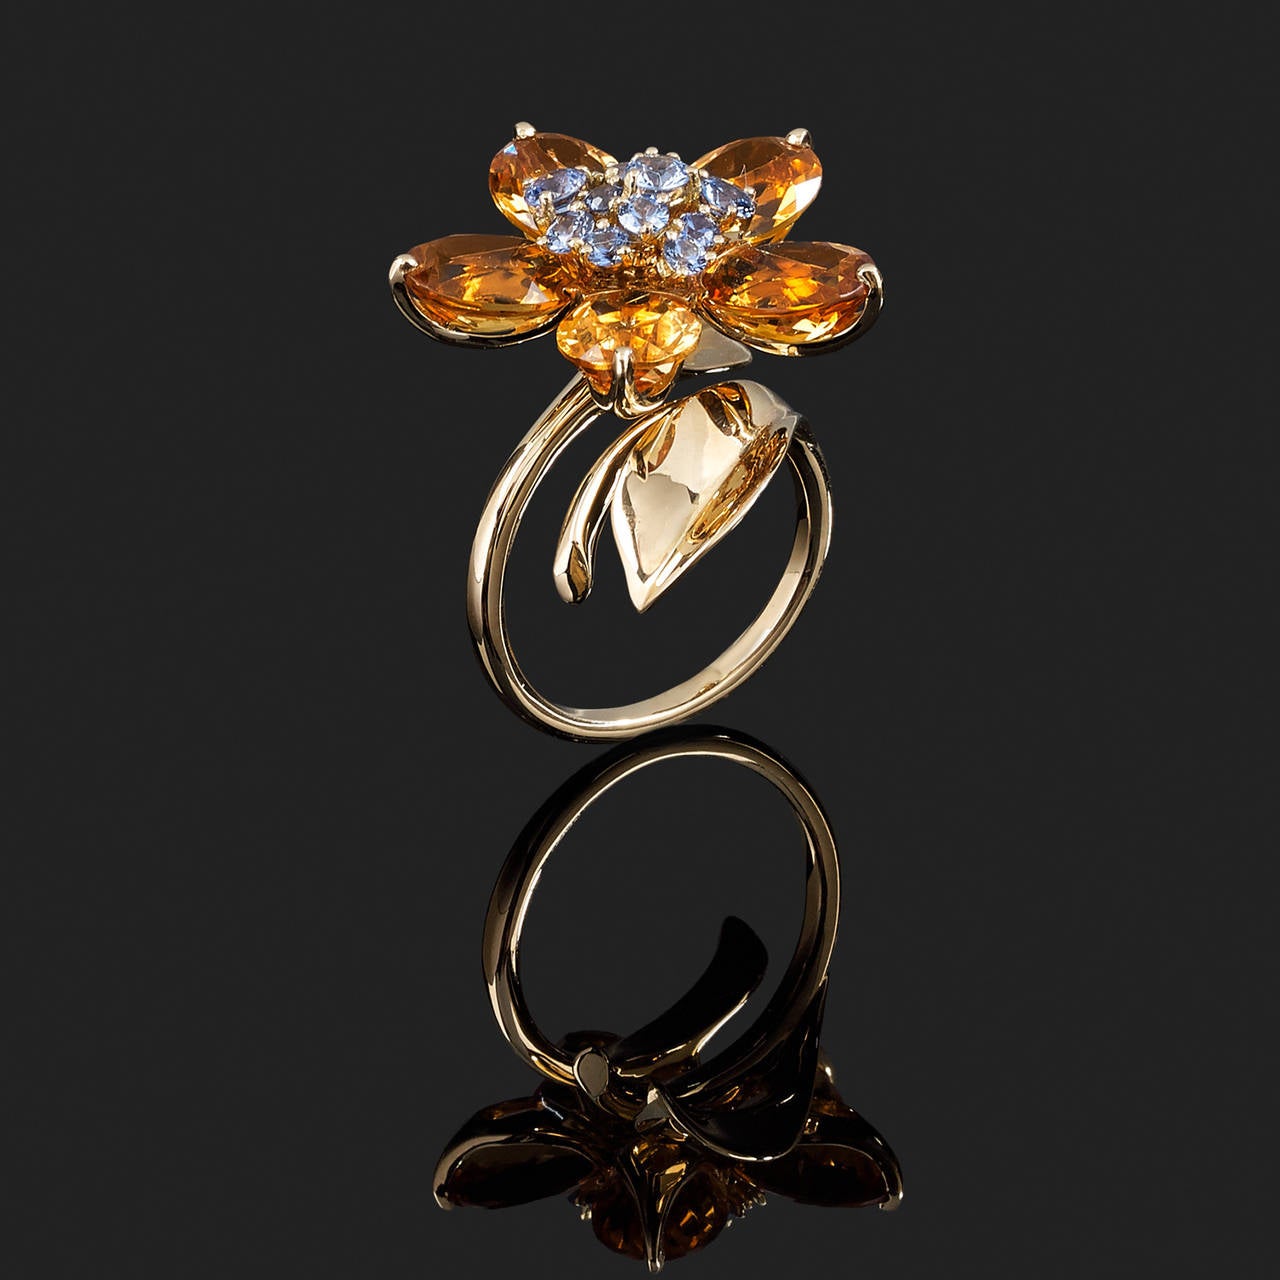 A sapphire, citrine and 18 k yellow gold ring stylising a flower. Signed Van Cleef & Arpels (Hawaï model) and numbered BL79664.

With original box and paper.